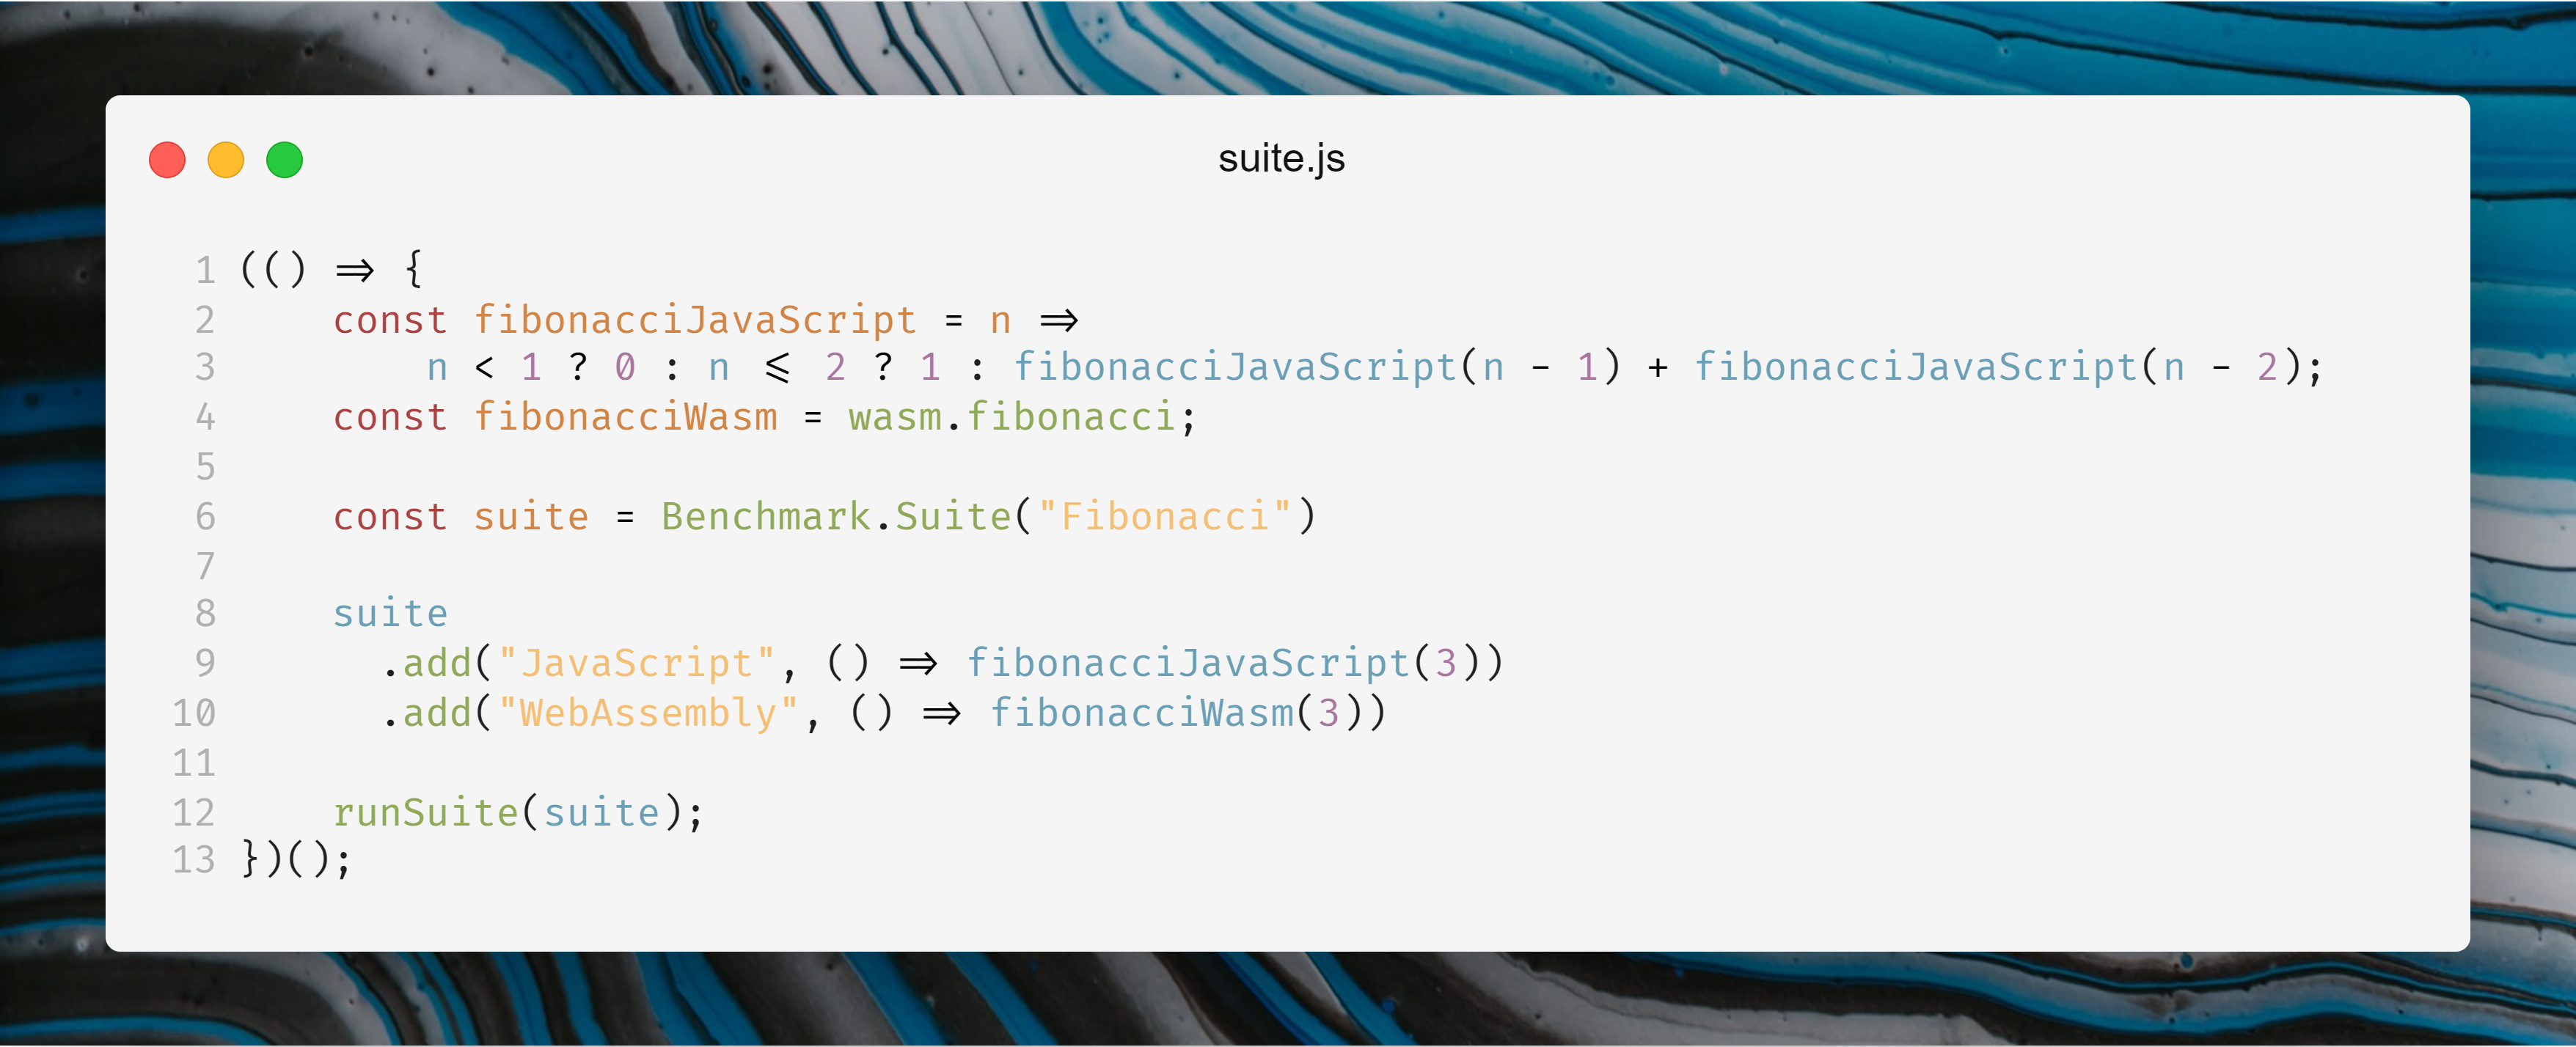 Fibonacci sequence until 3 using WASM and JS.